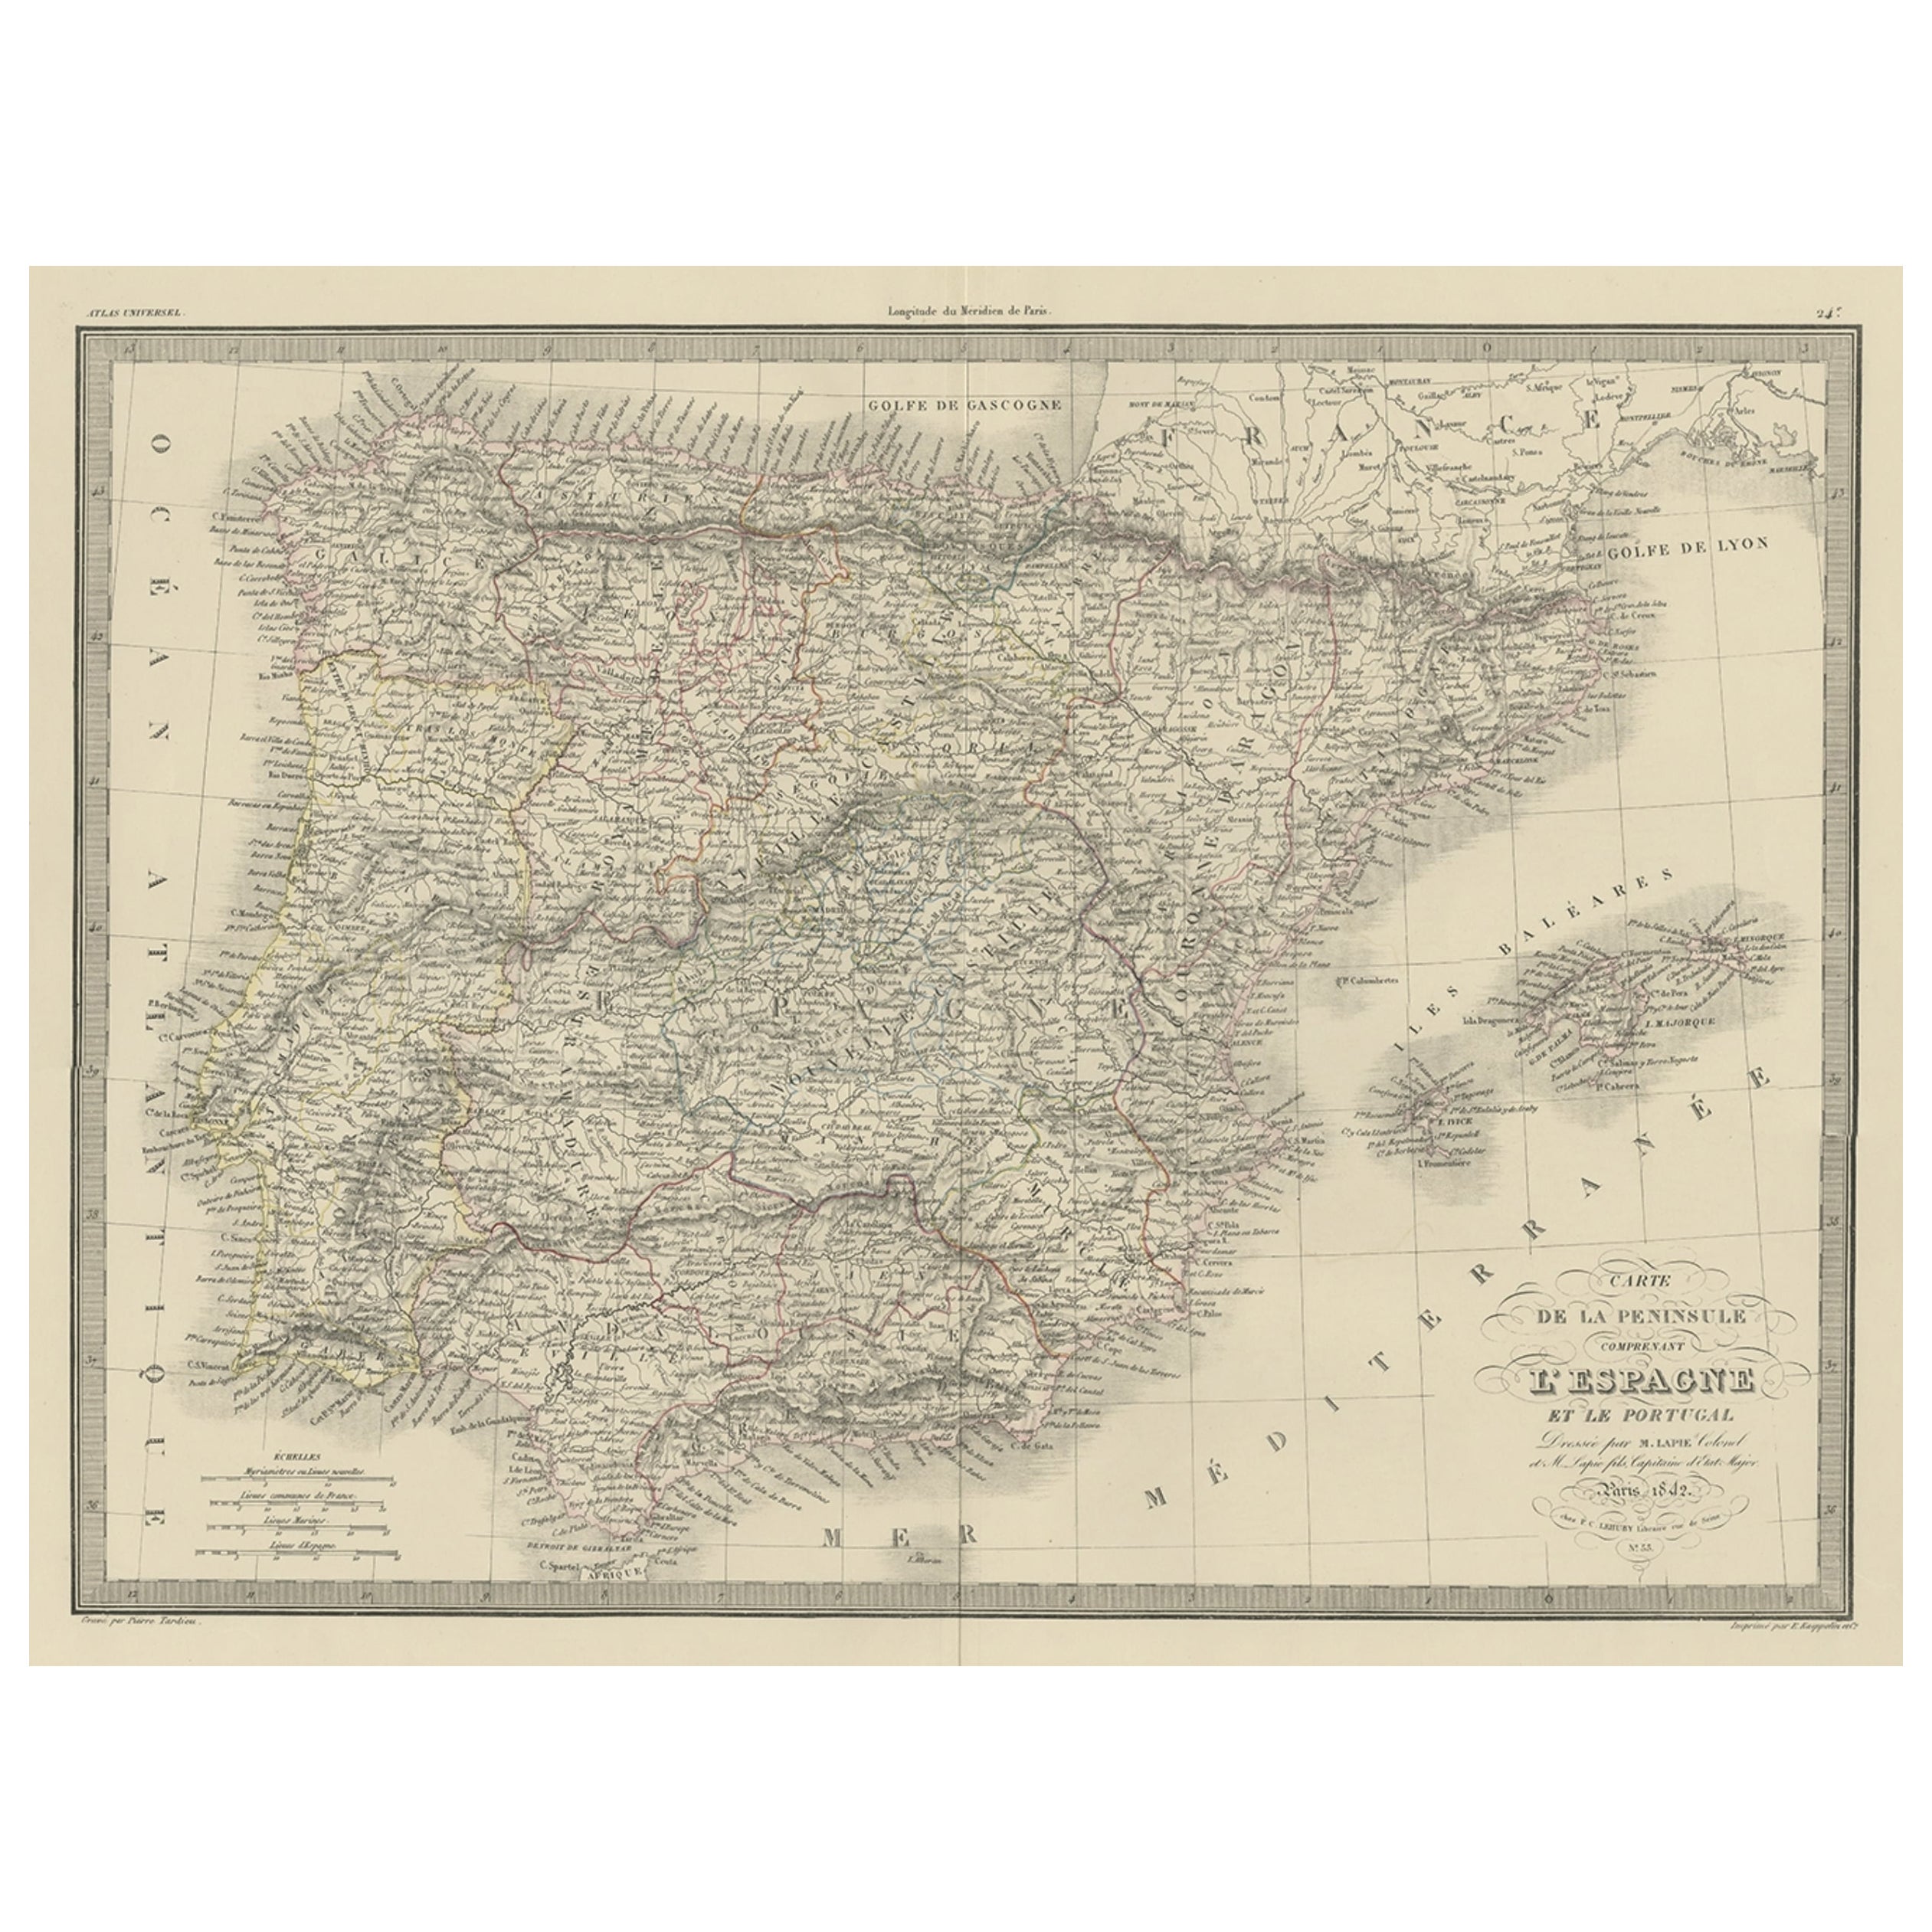 Antique Decorative Map of Portugal and Spain, 1842